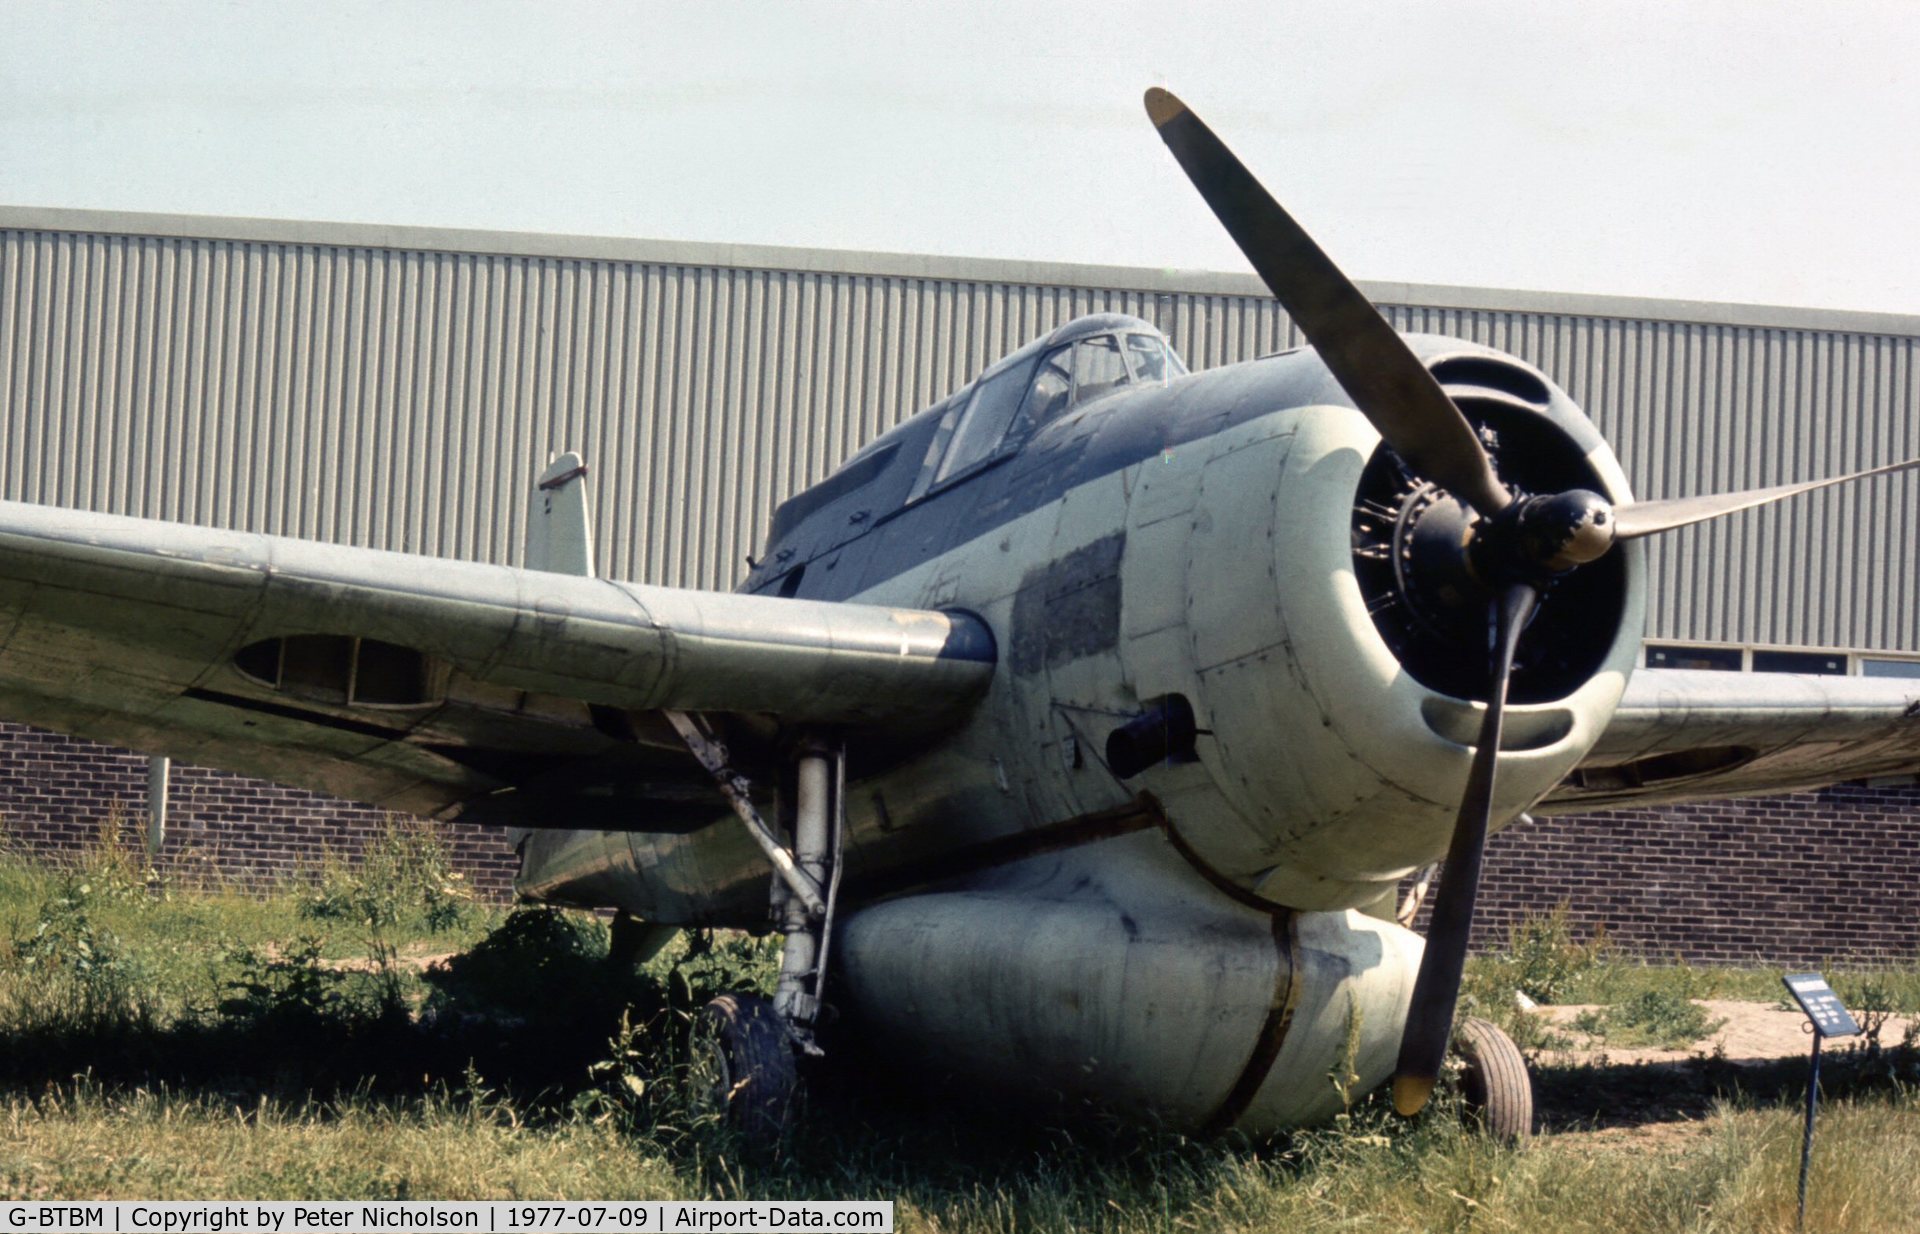 G-BTBM, Grumman TBM-3W2 Avenger C/N 2469, Another view of the ex-Royal Netherlands Navy Avenger serial 045 of the Strathallan Collection as seen in the Summer of 1977.